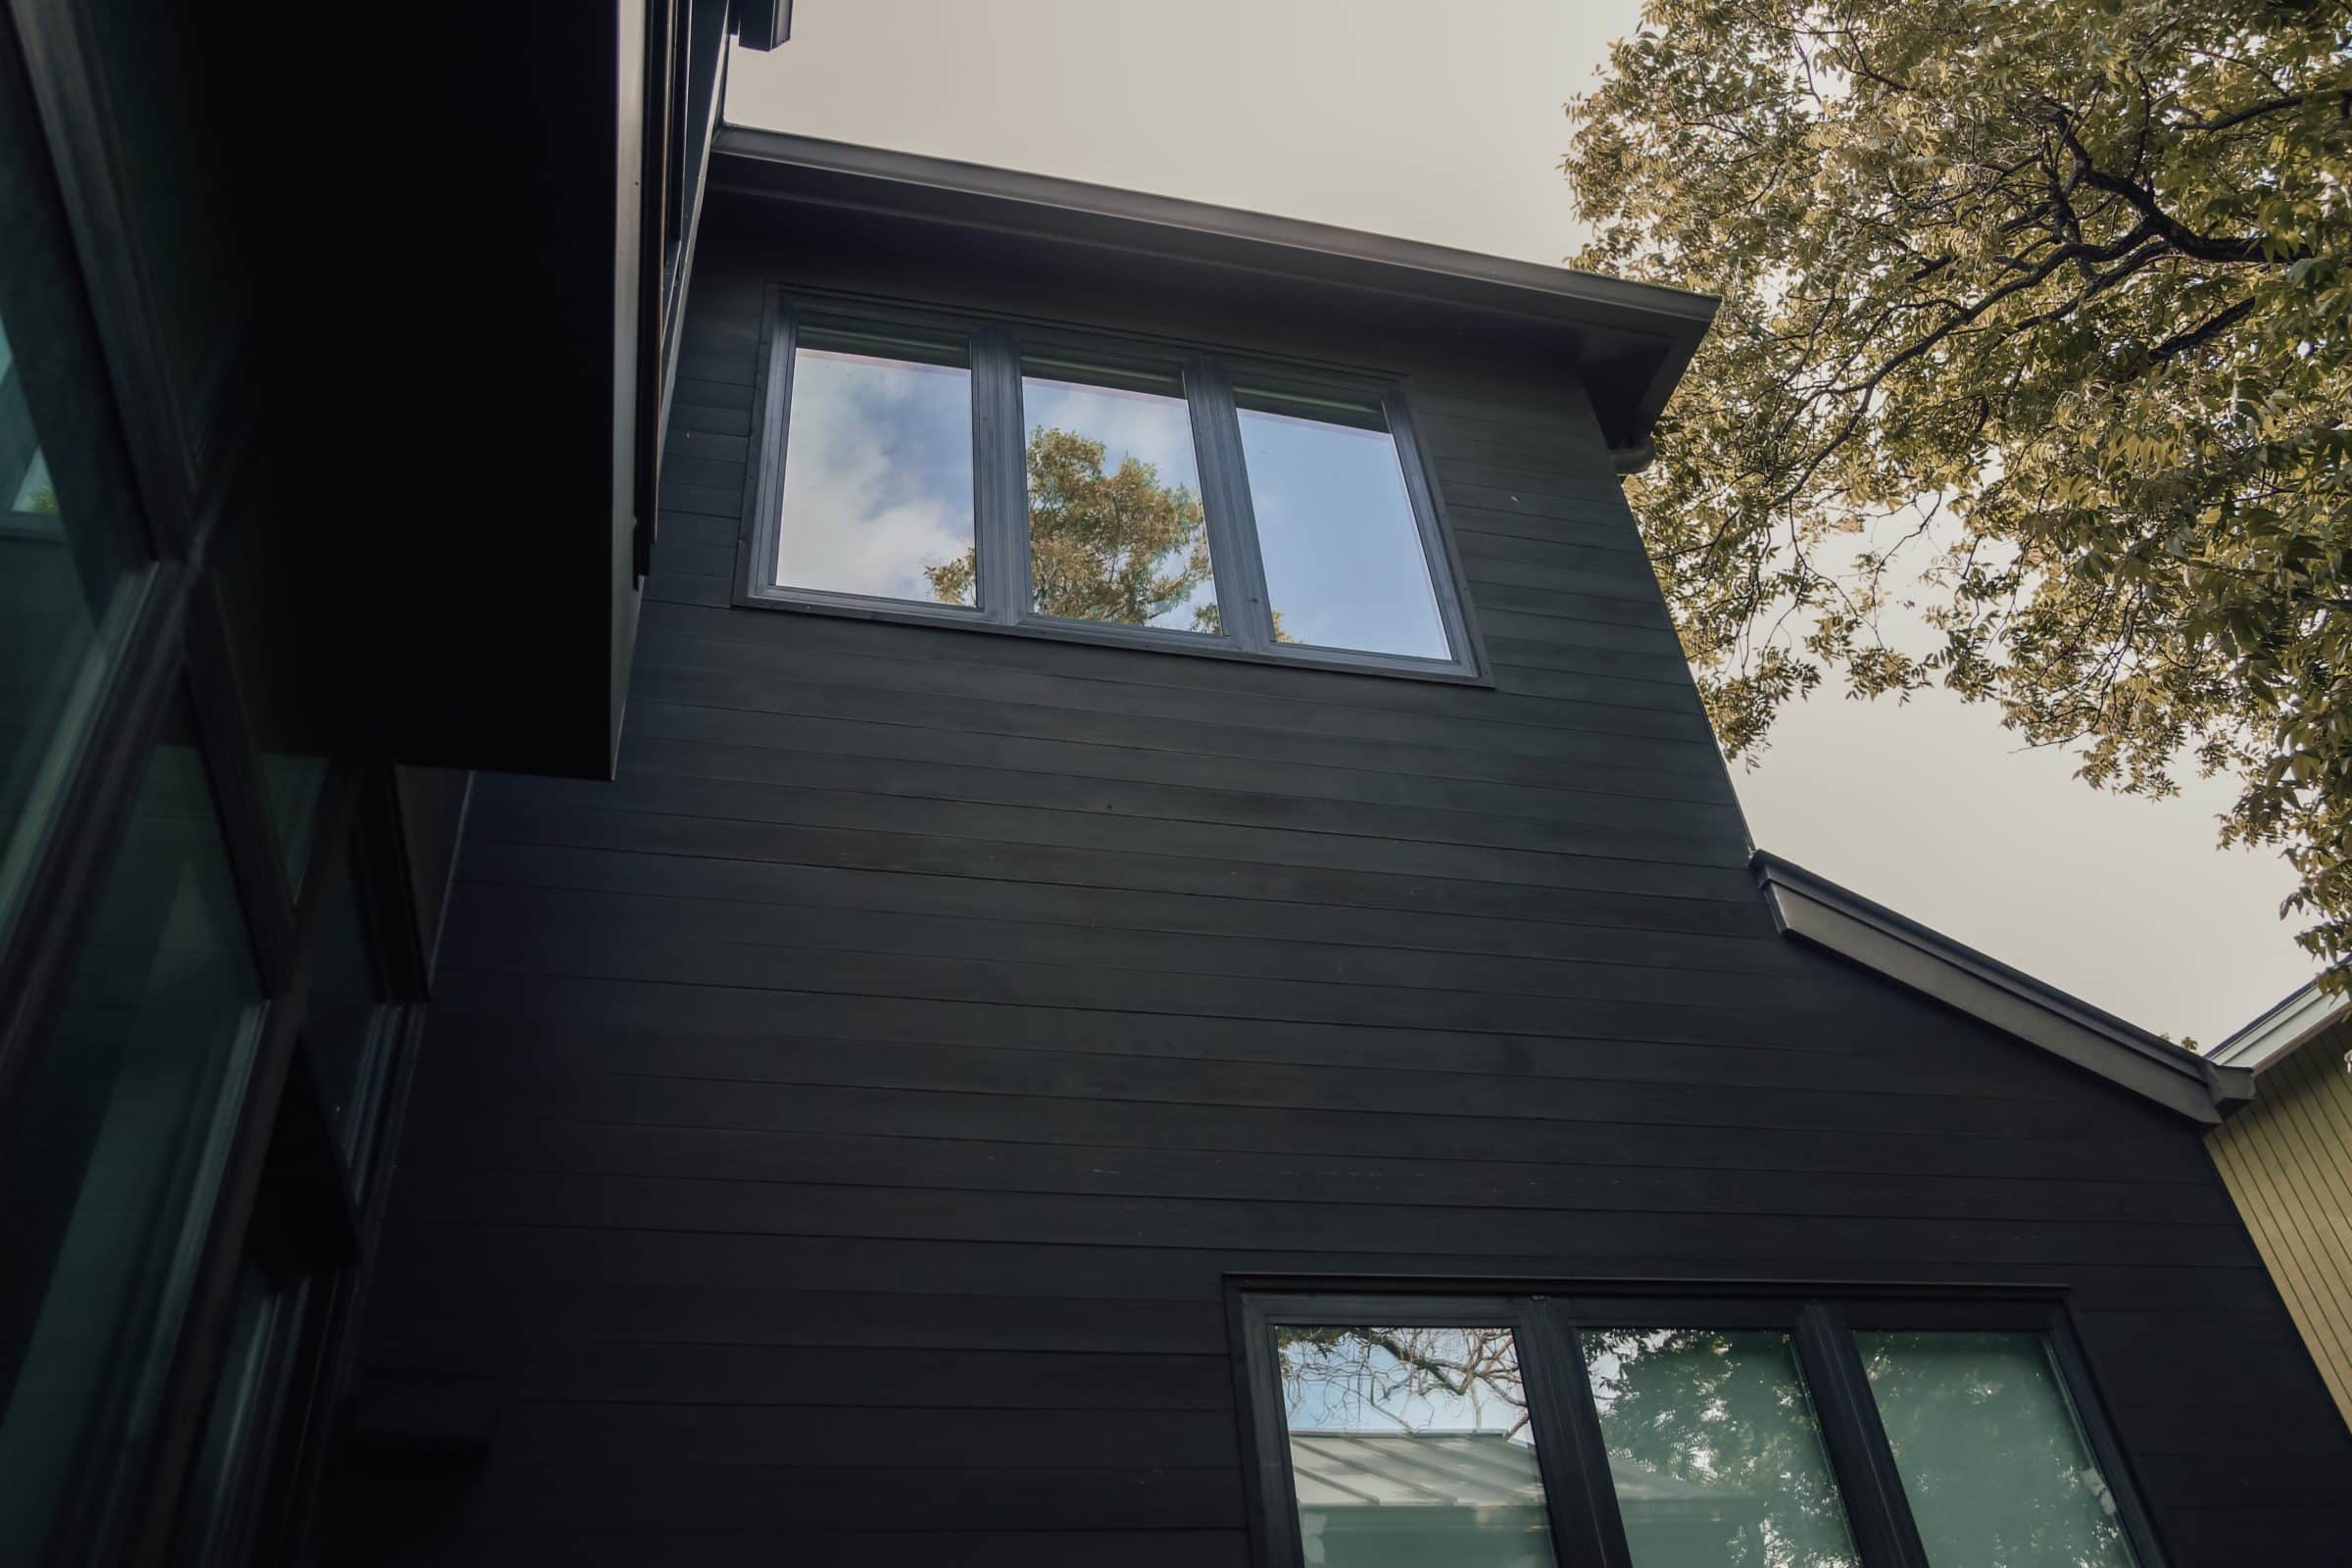 House exterior cladding painted black